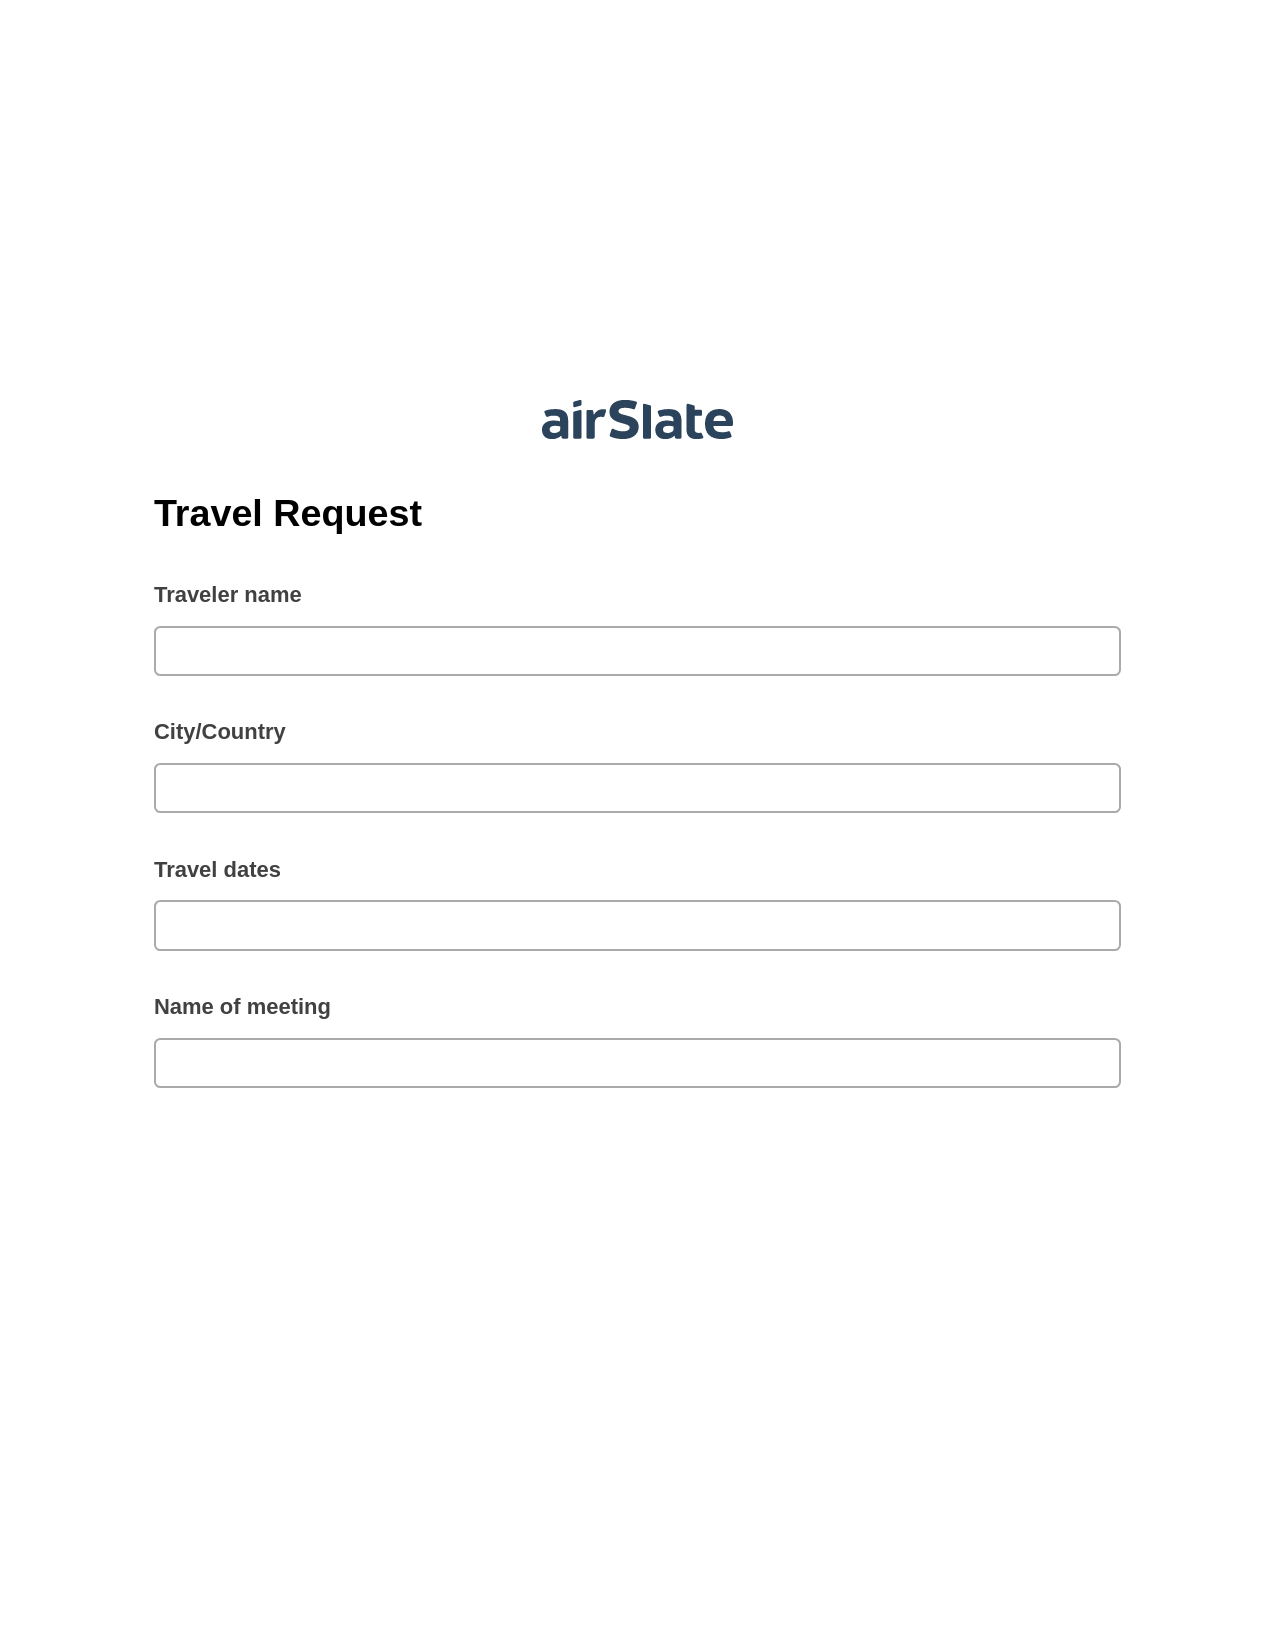 Travel Request Pre-fill from another Slate Bot, Create slate addon, Export to MySQL Bot